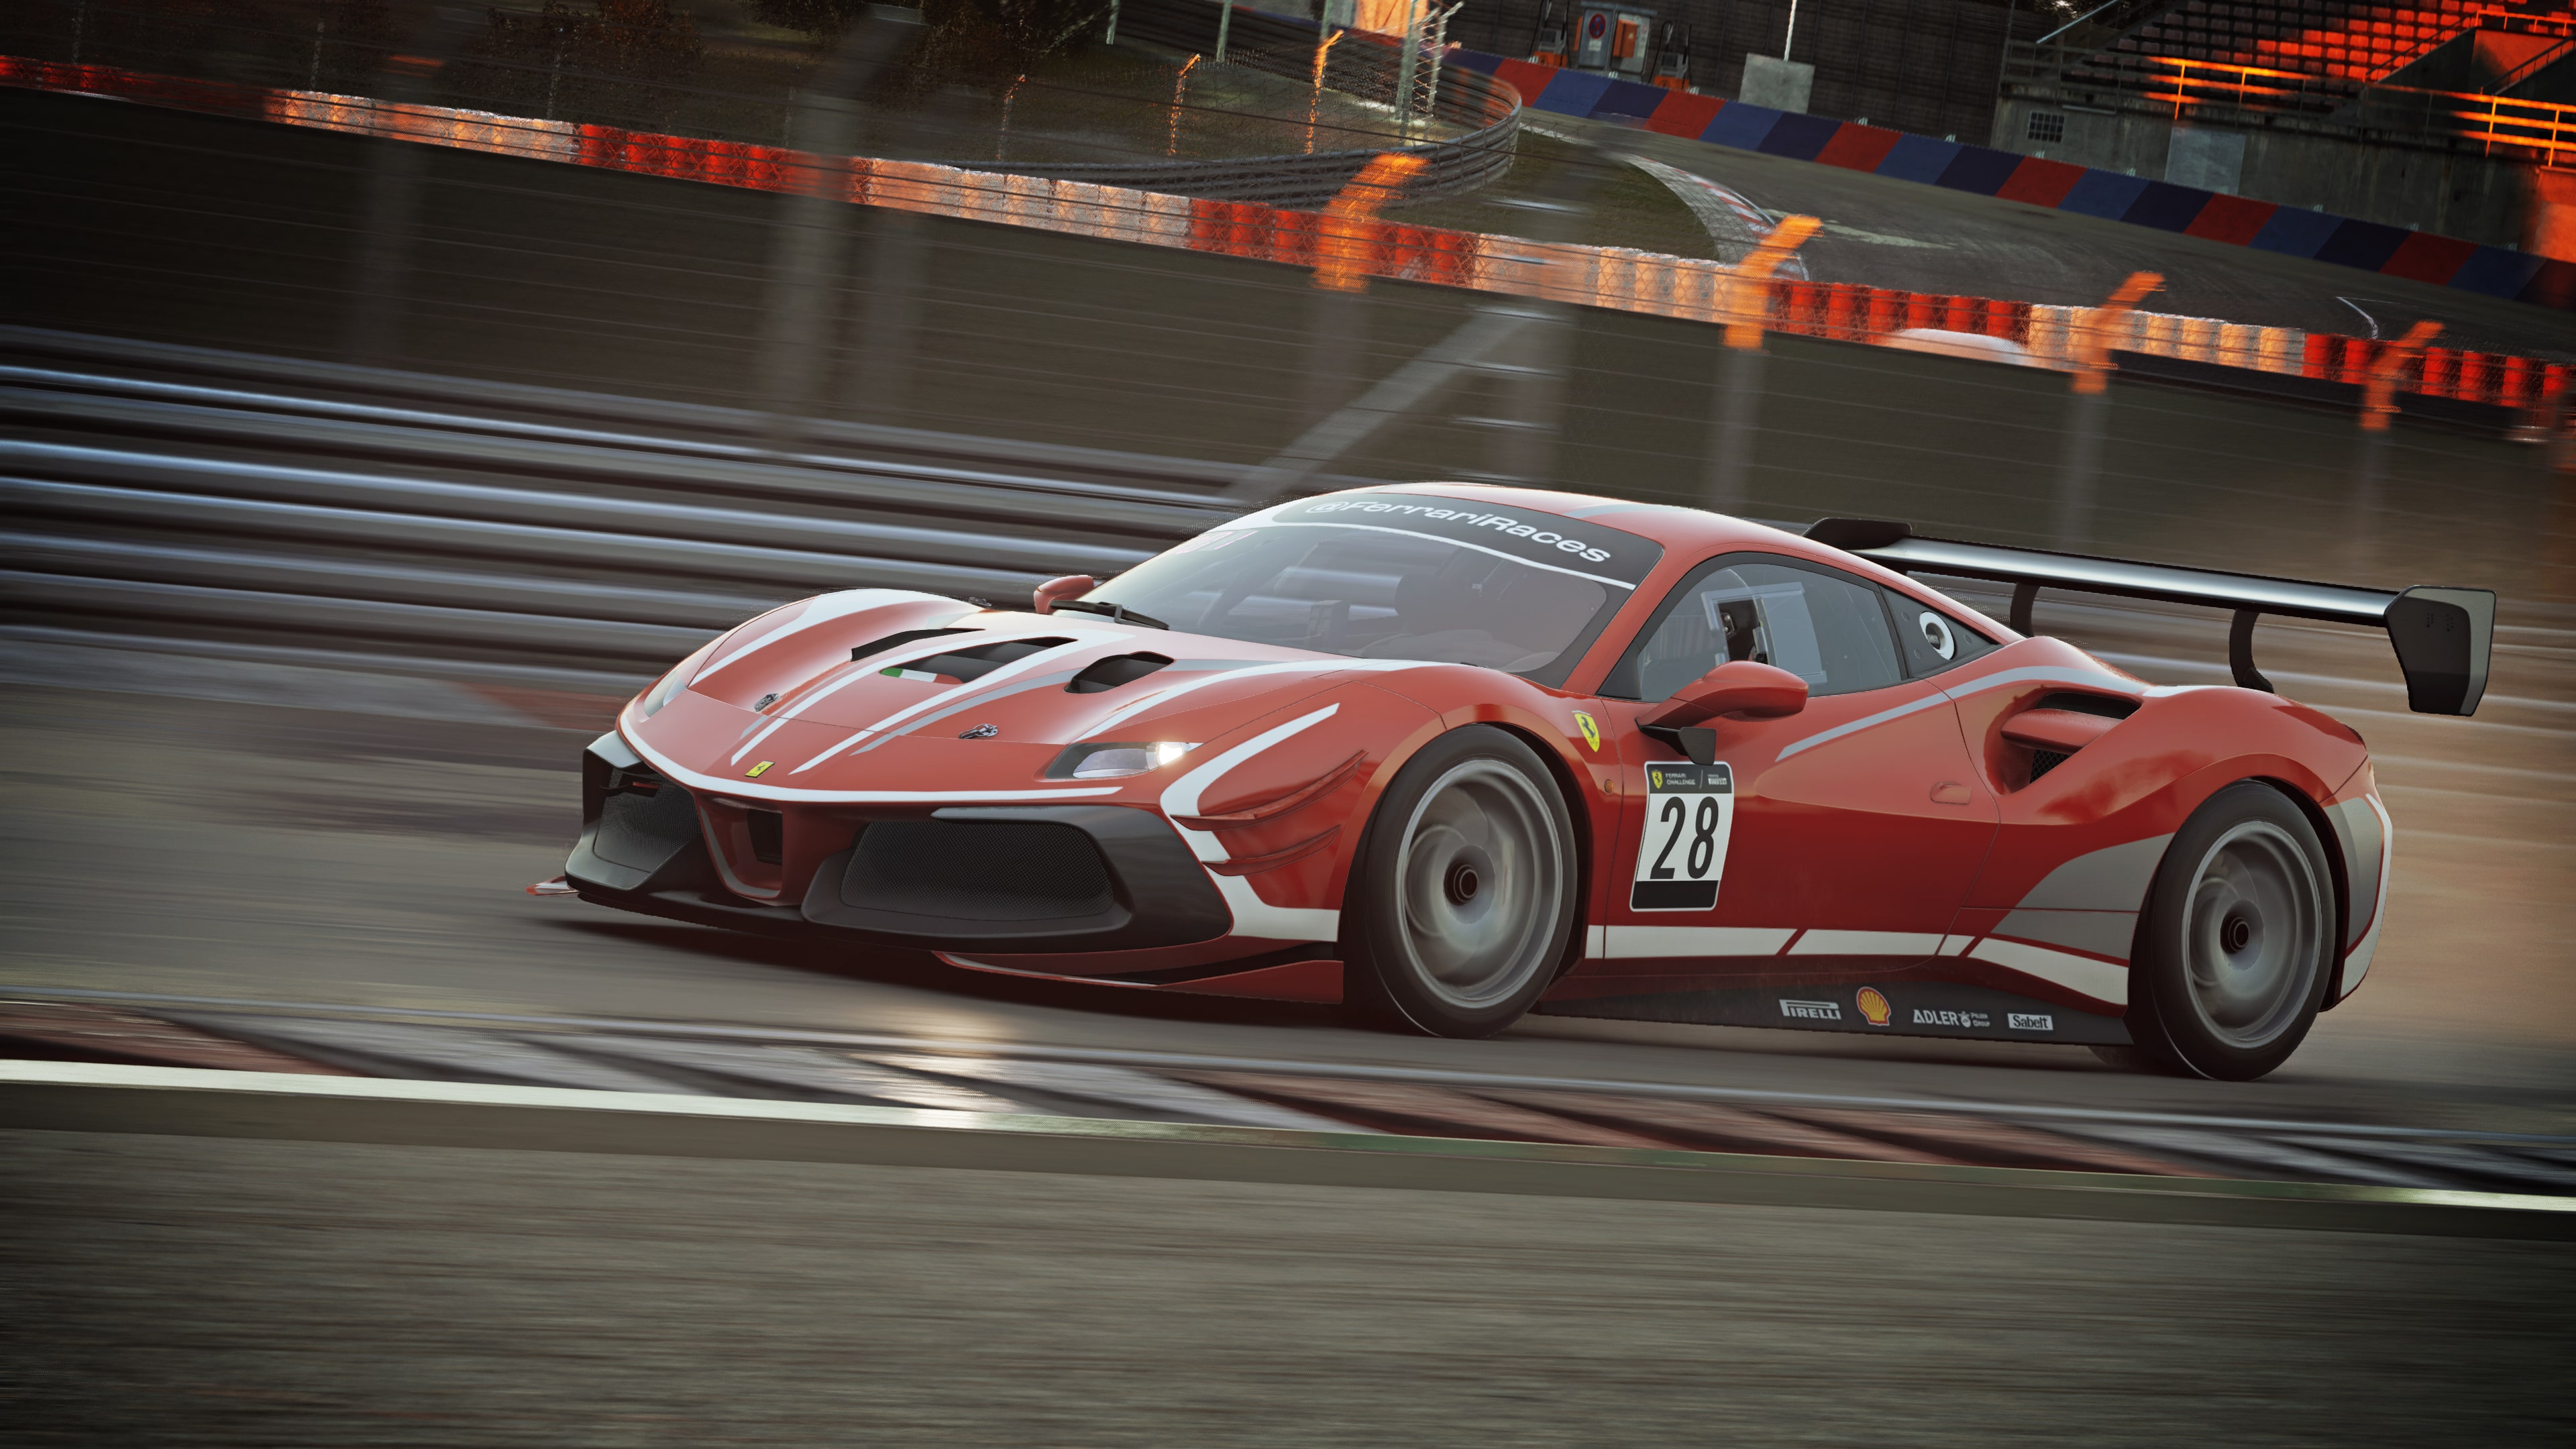 Assetto Corsa Competizione PS5 — Challengers Pack on PS5 — price history,  screenshots, discounts • Luxembourg